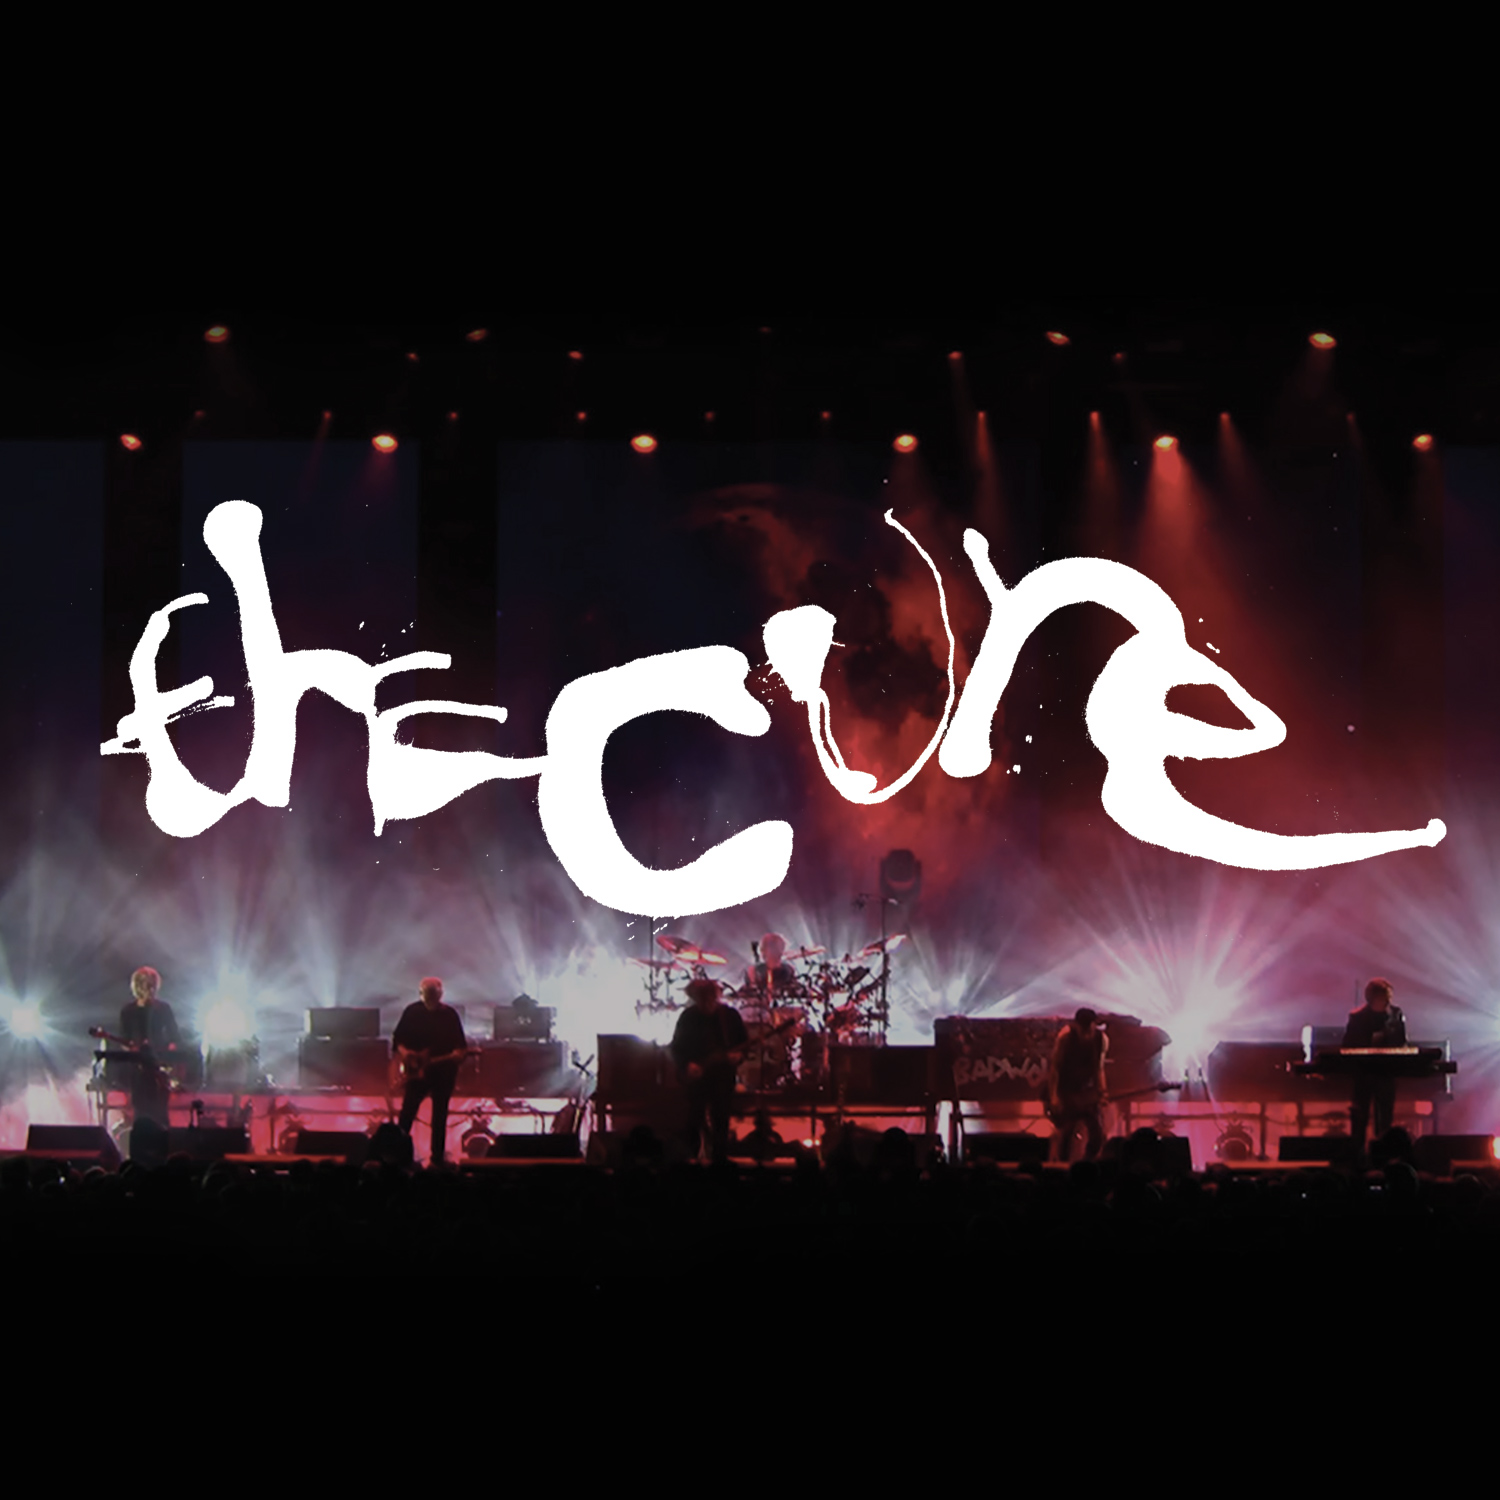 www.thecure.com